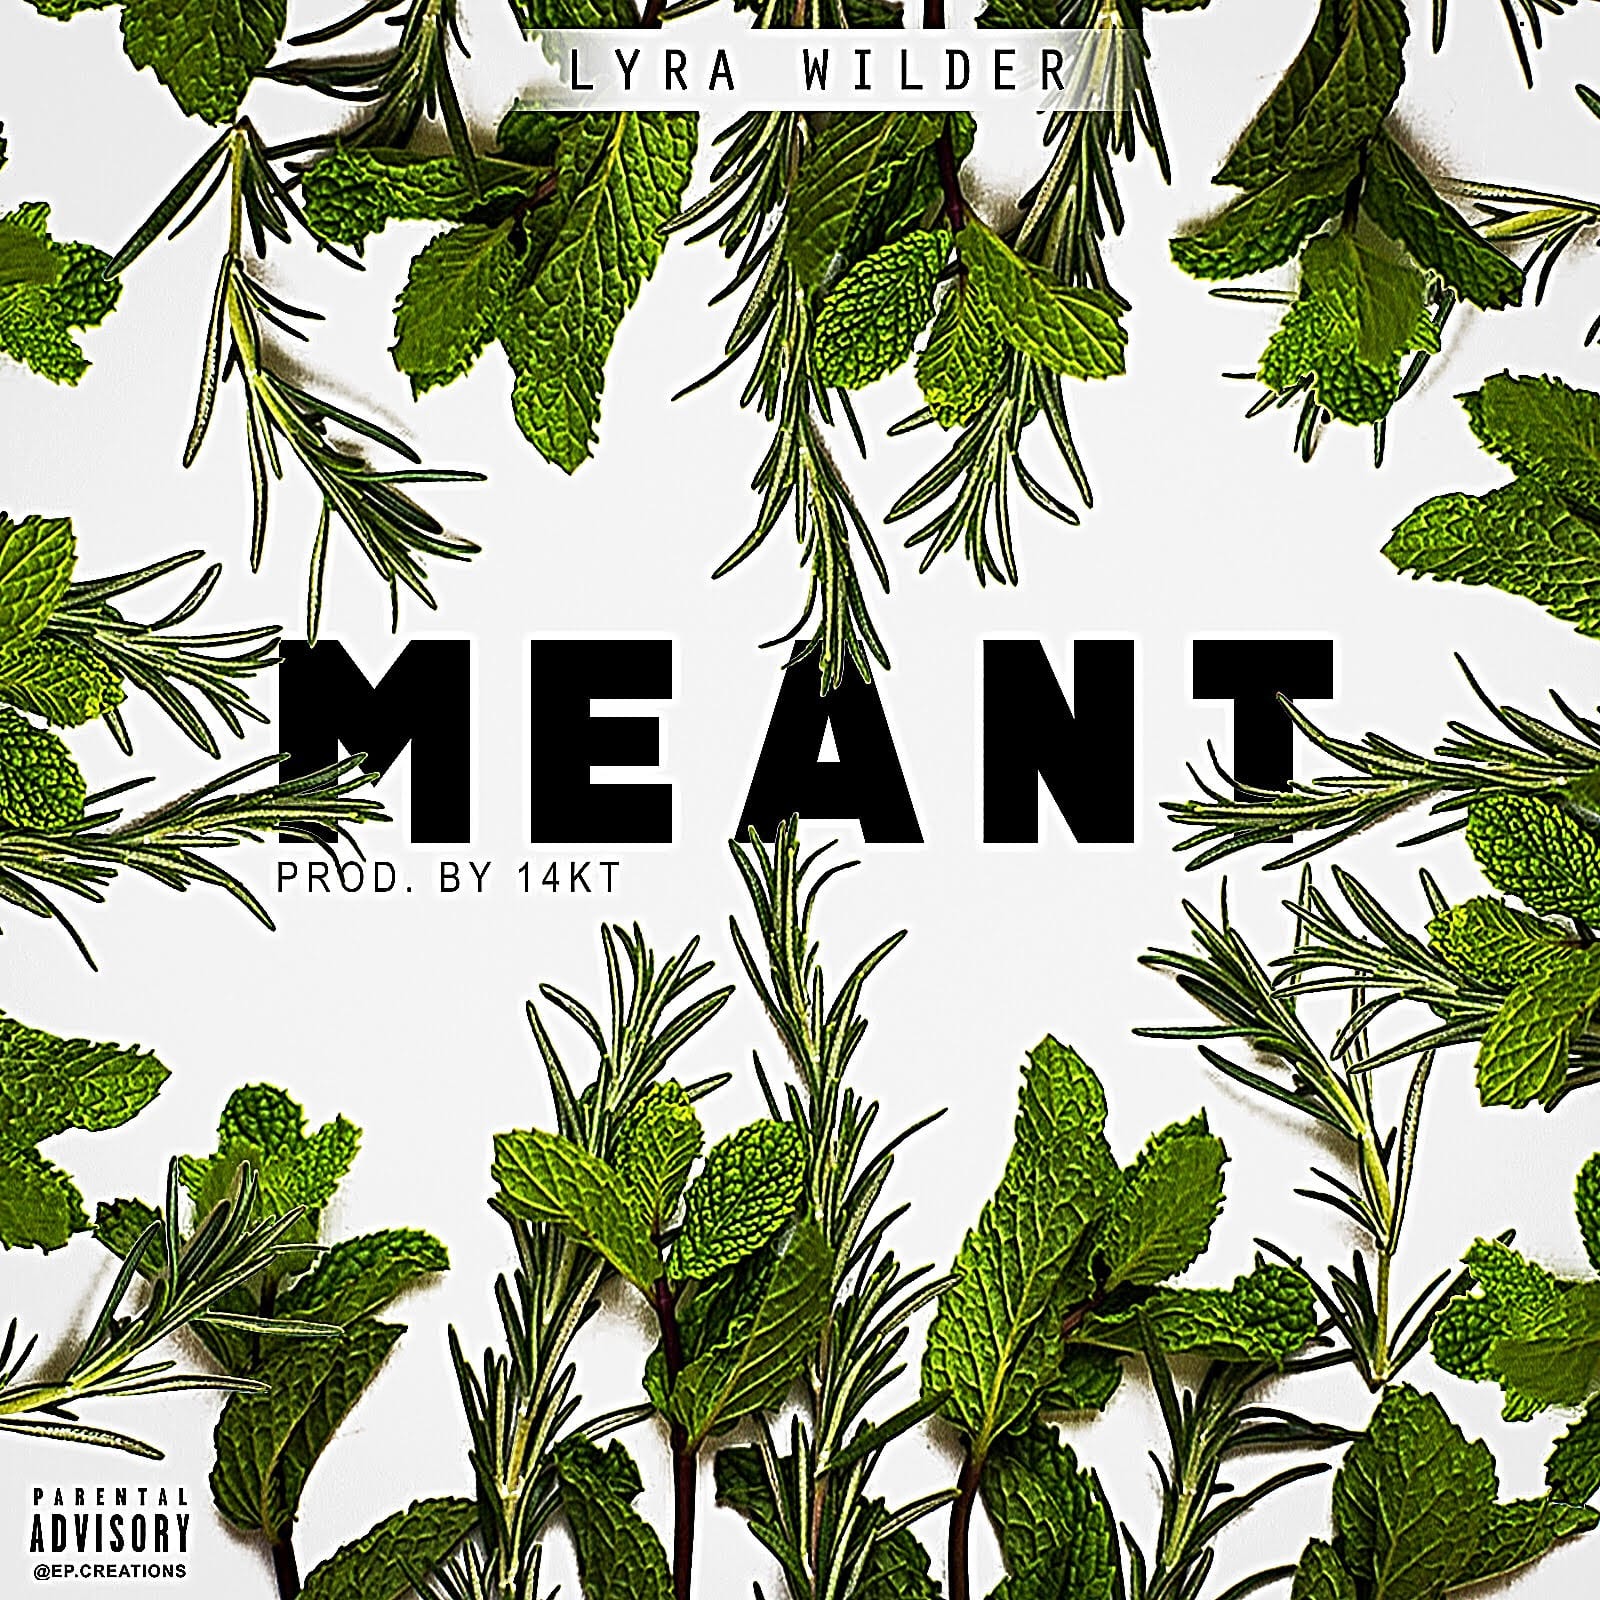 Lyra Wilder Drops New Single - MEANT